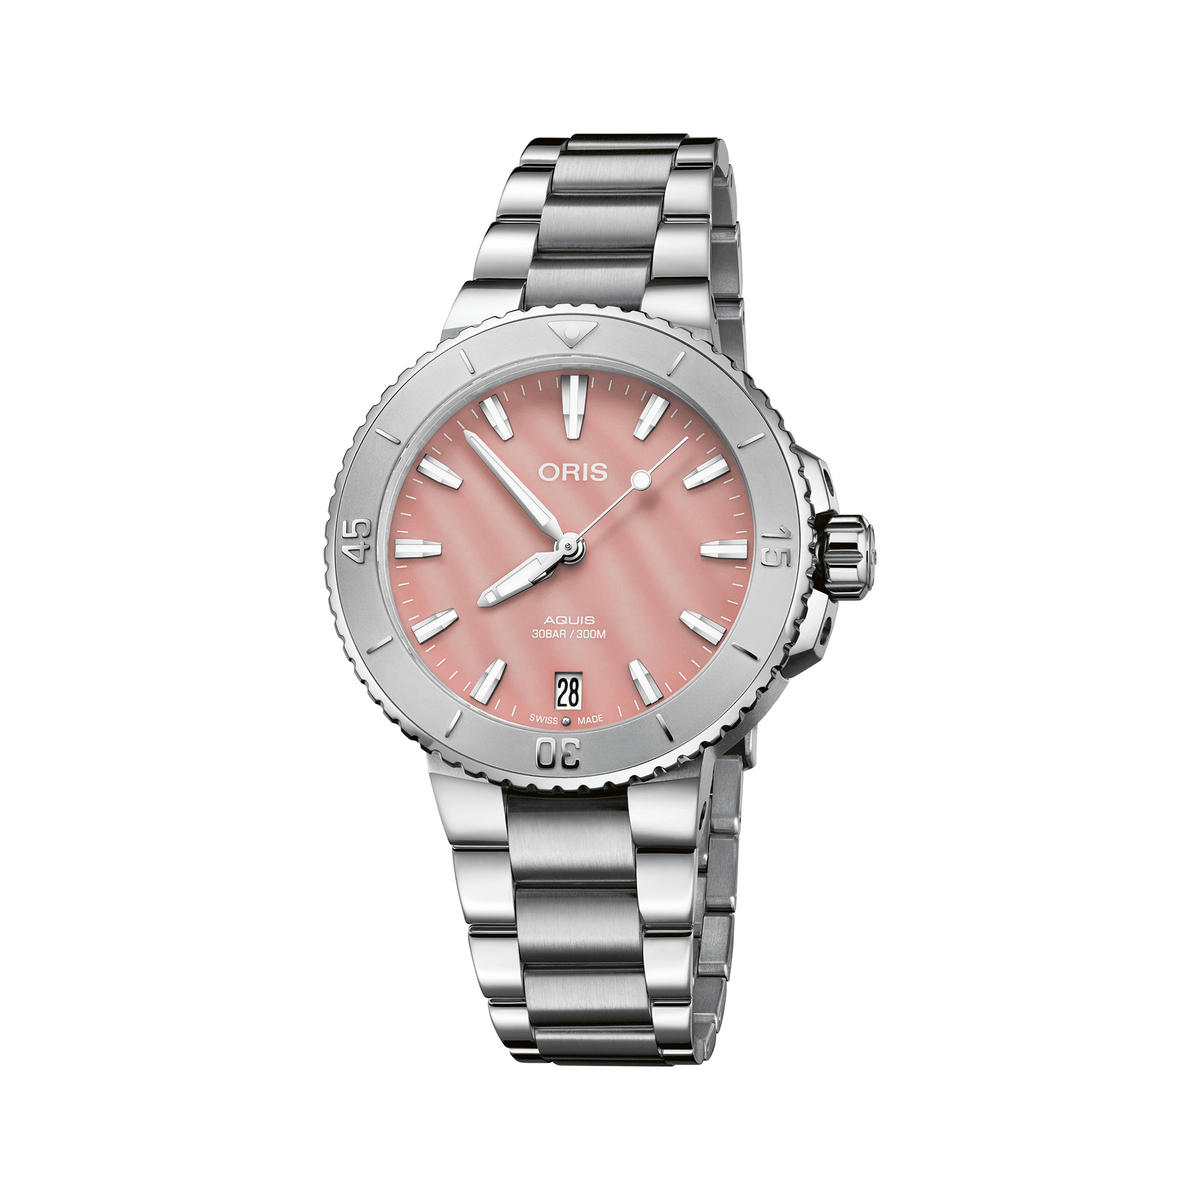 Oris Aquis Women's 36.5mm Stainless Steel Automatic Watch 733 7770 4158MB - Wallace Bishop